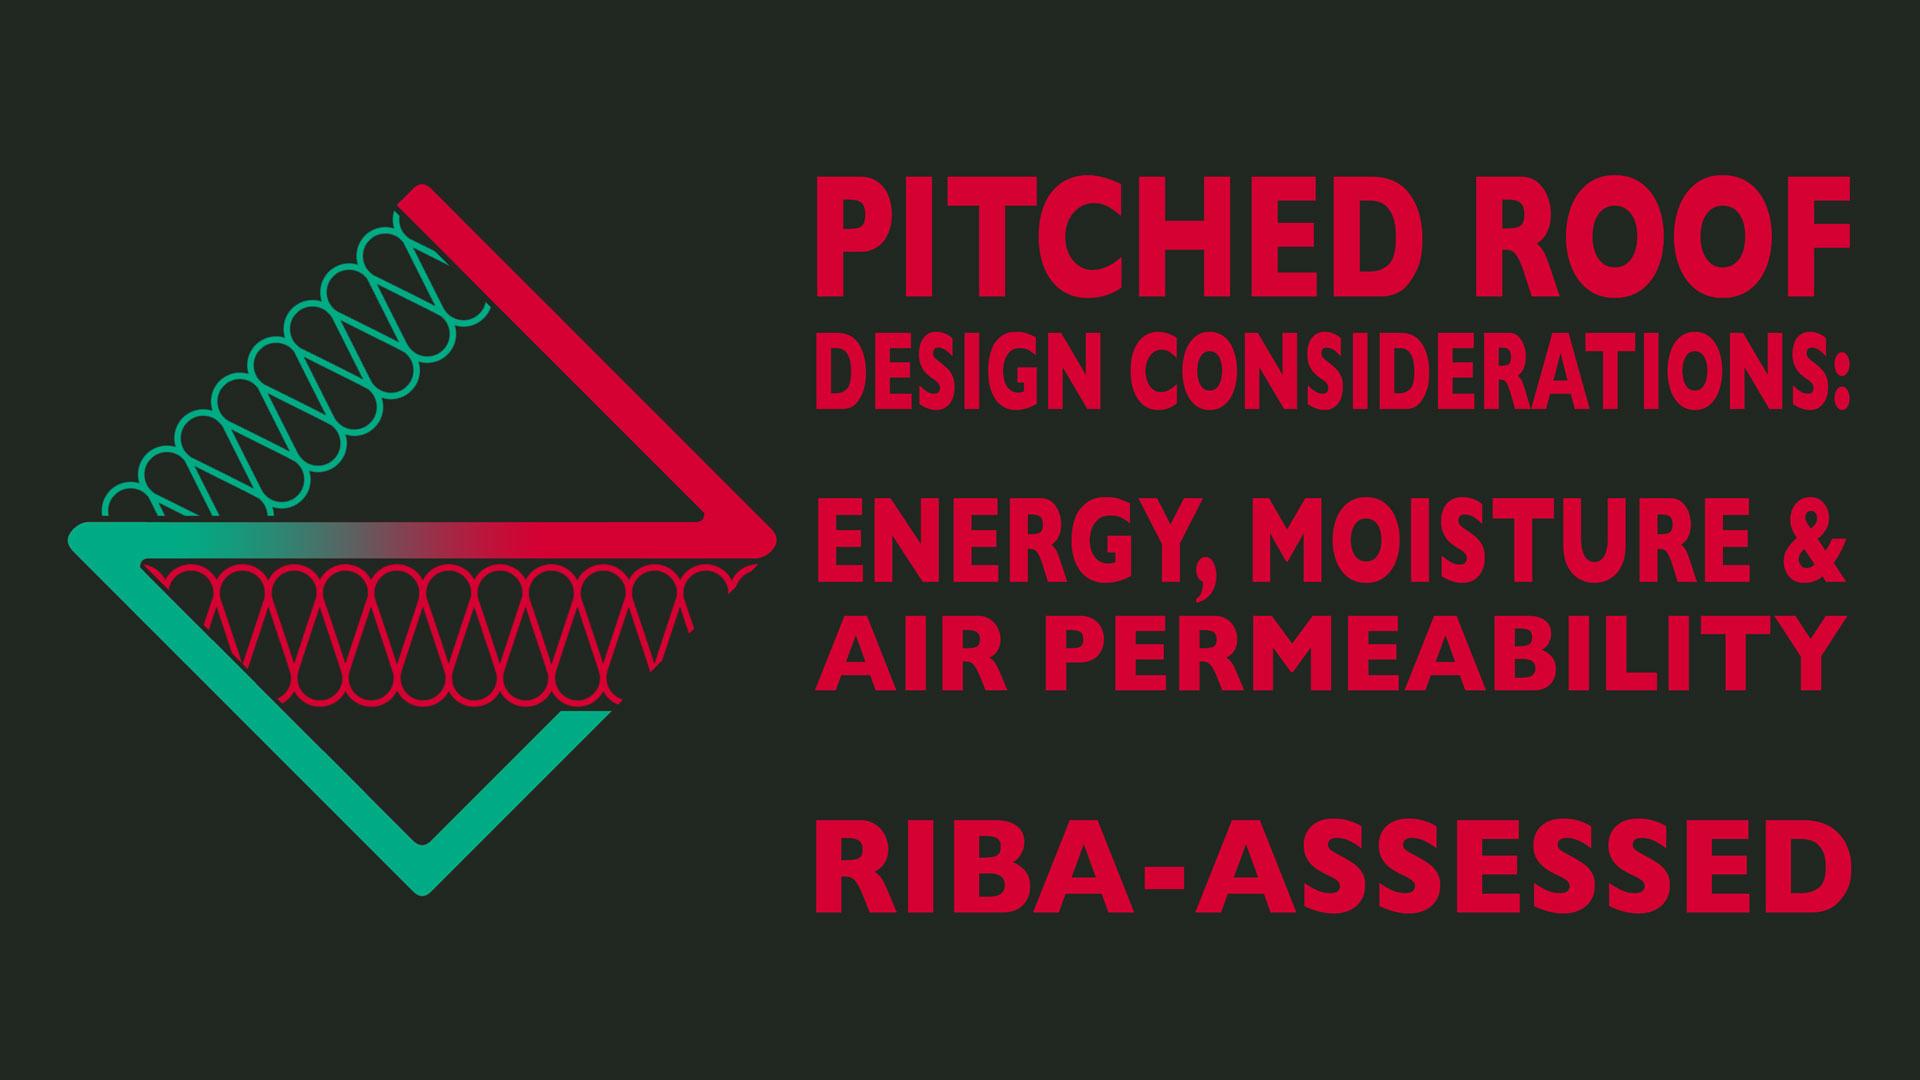 RIBA - Pitched Roof Design Considerations: Energy, Moisture & Air Permeability